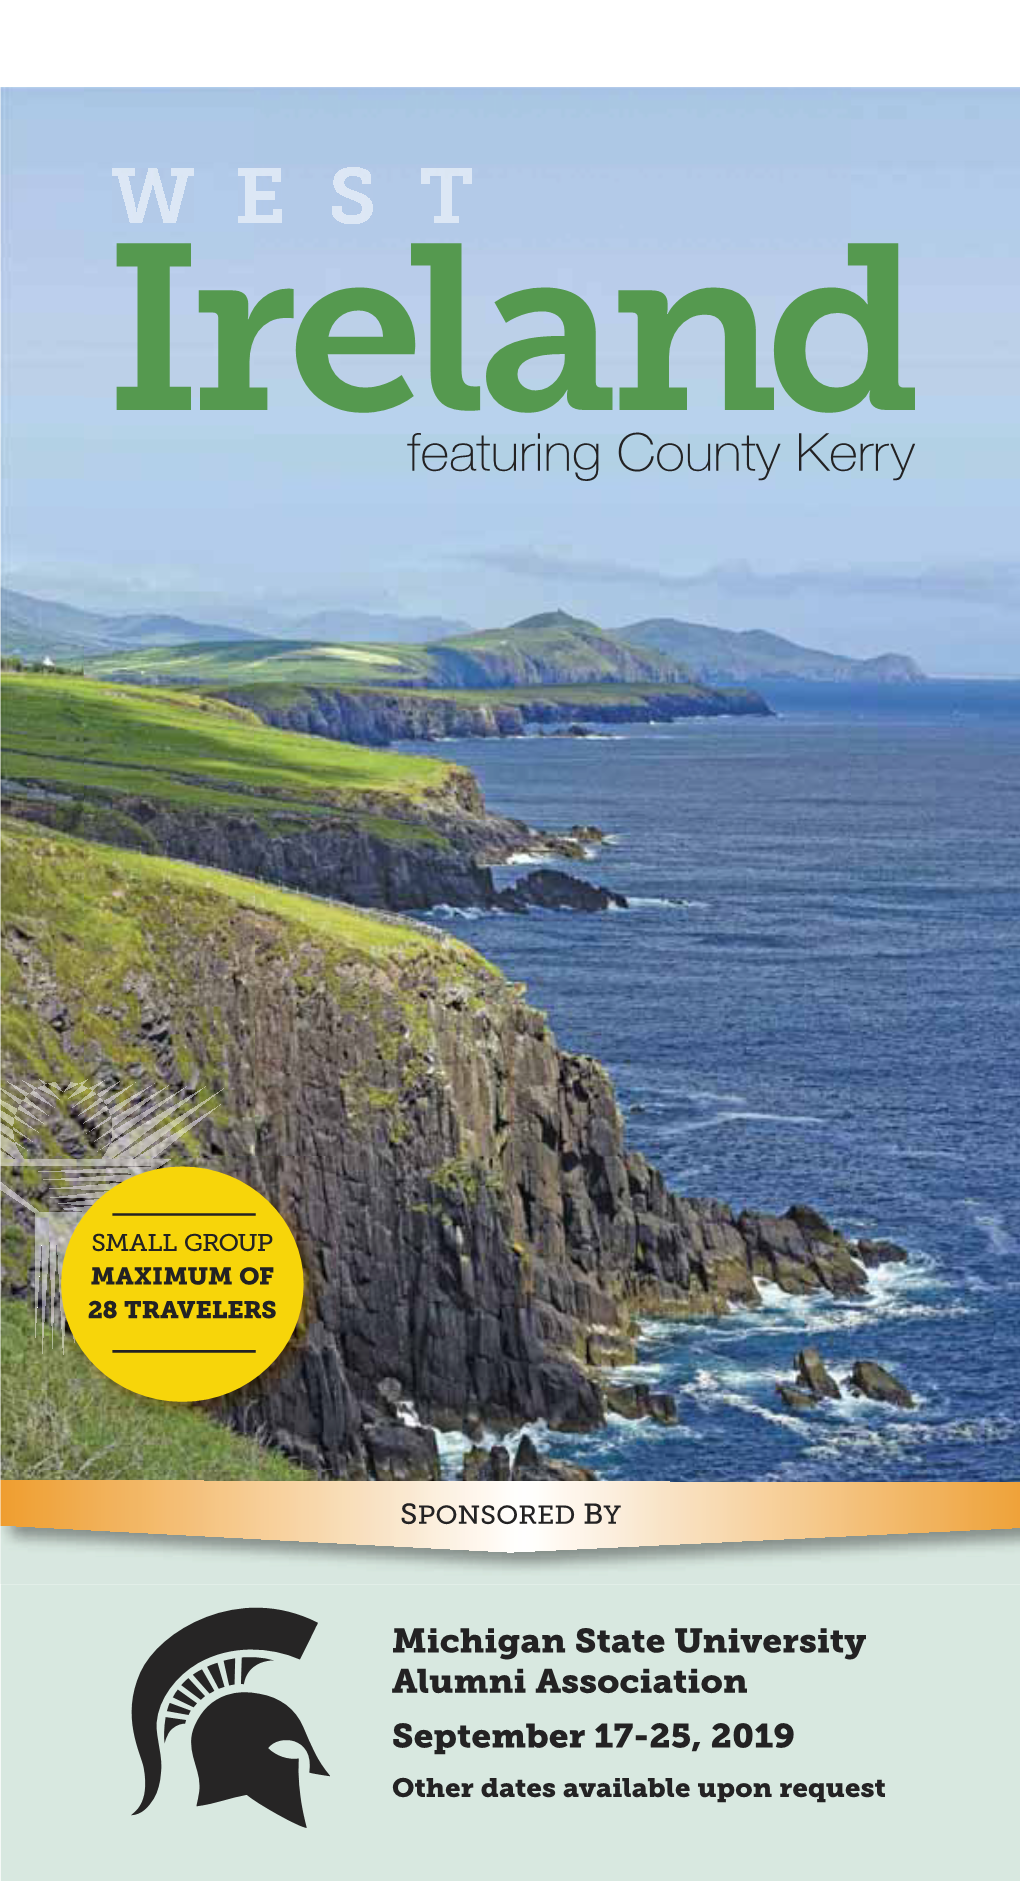 Featuring County Kerry